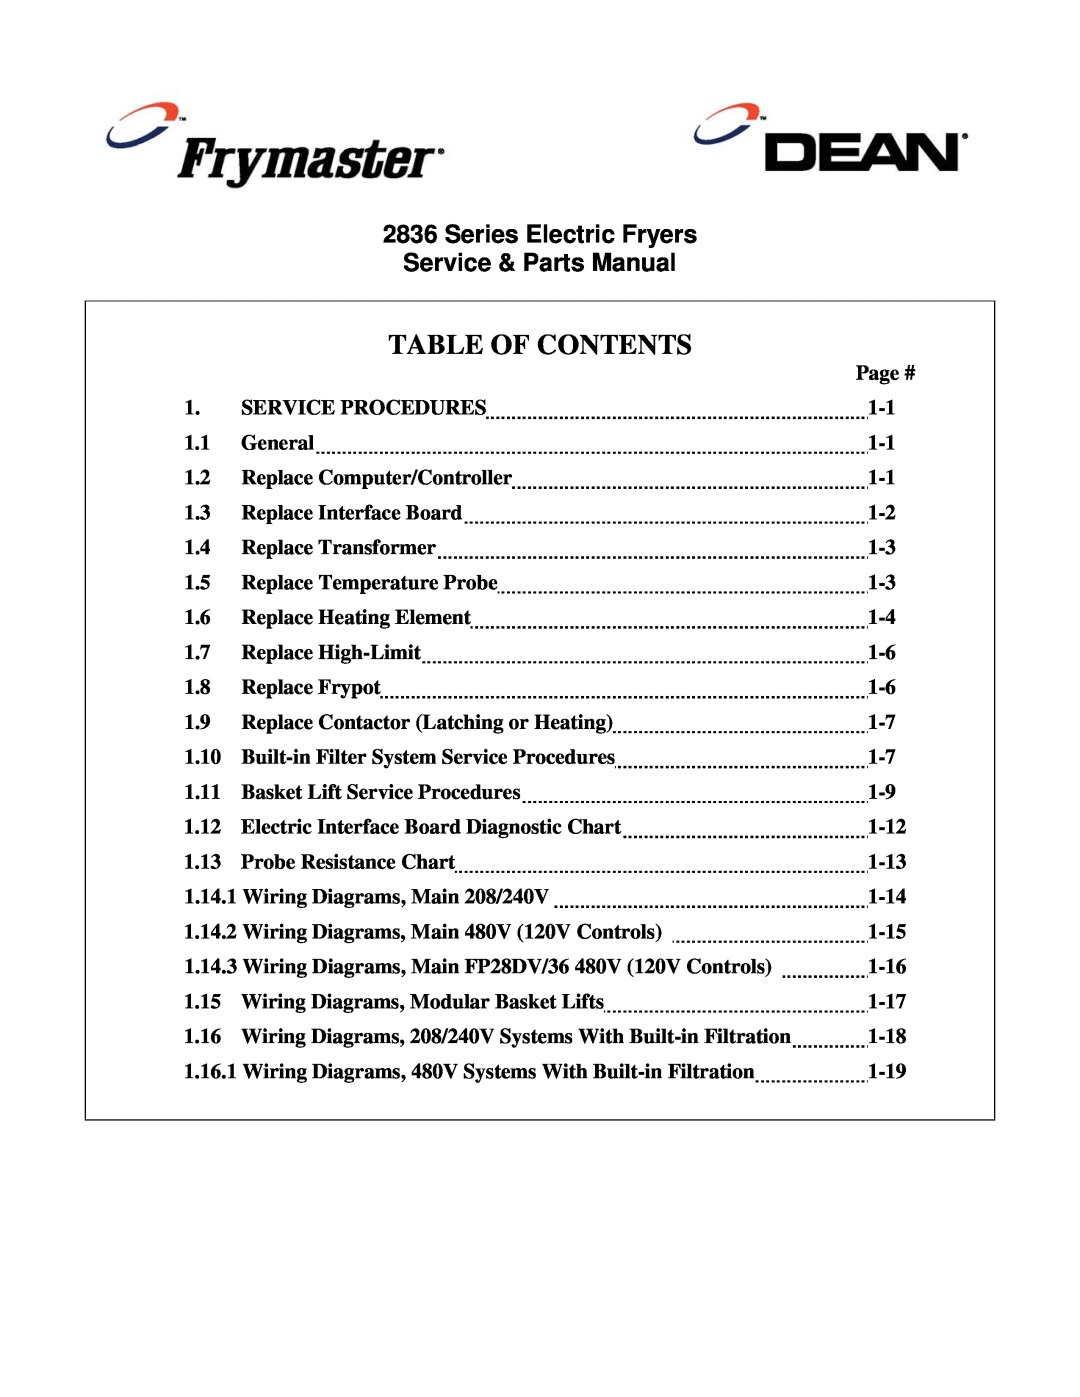 Frymaster 2836 manual Table Of Contents, Series Electric Fryers Service & Parts Manual 